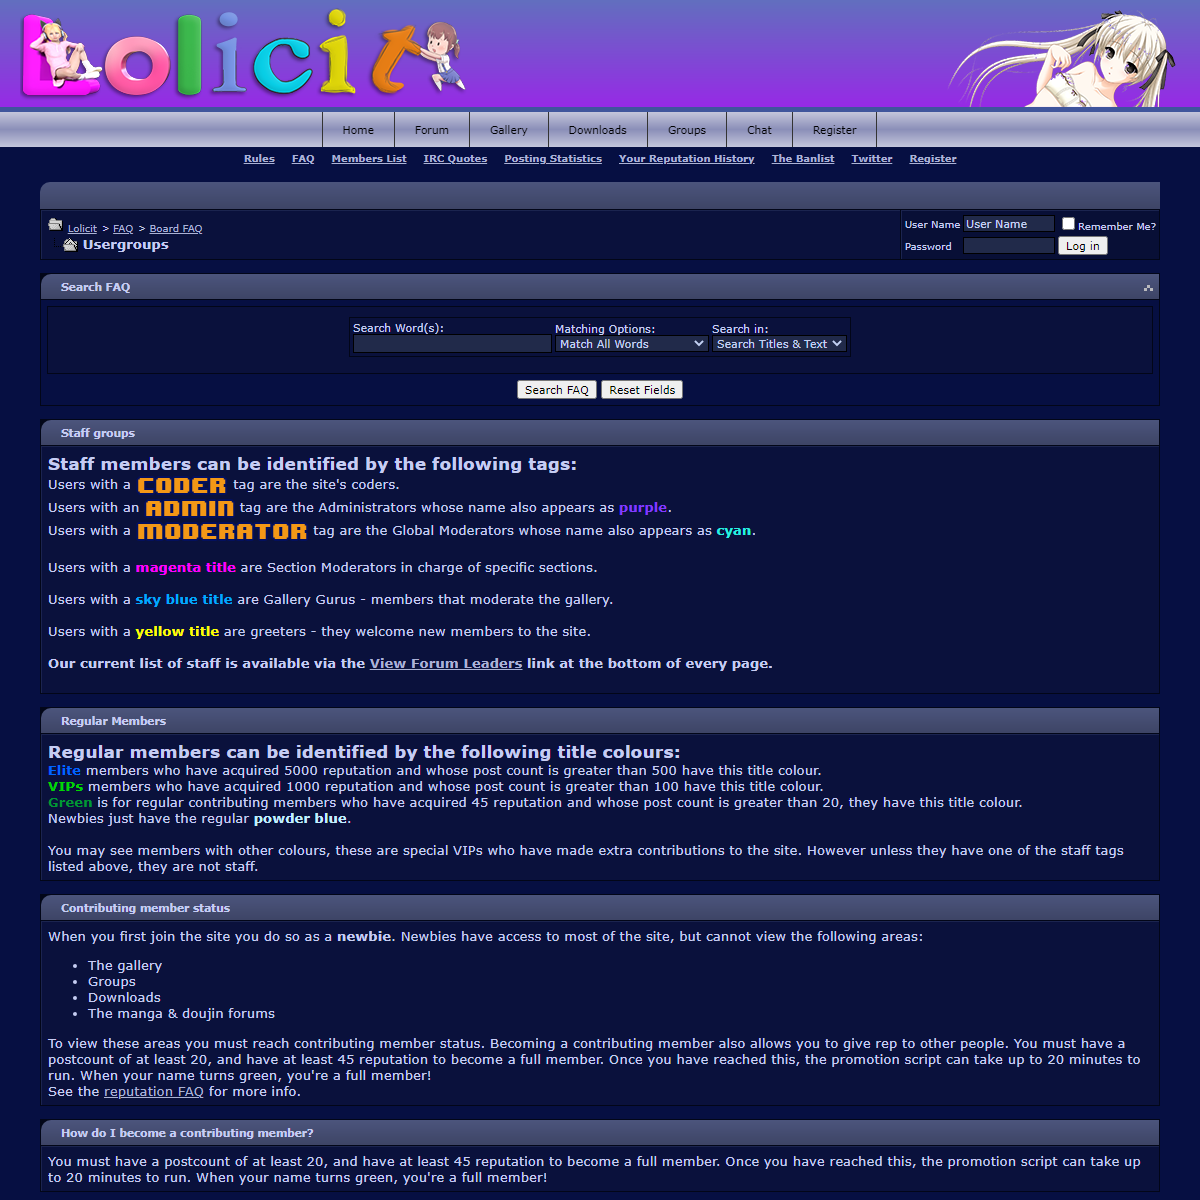 A complete backup of http://www.lolicit.org/faq.php?faq=usergroups